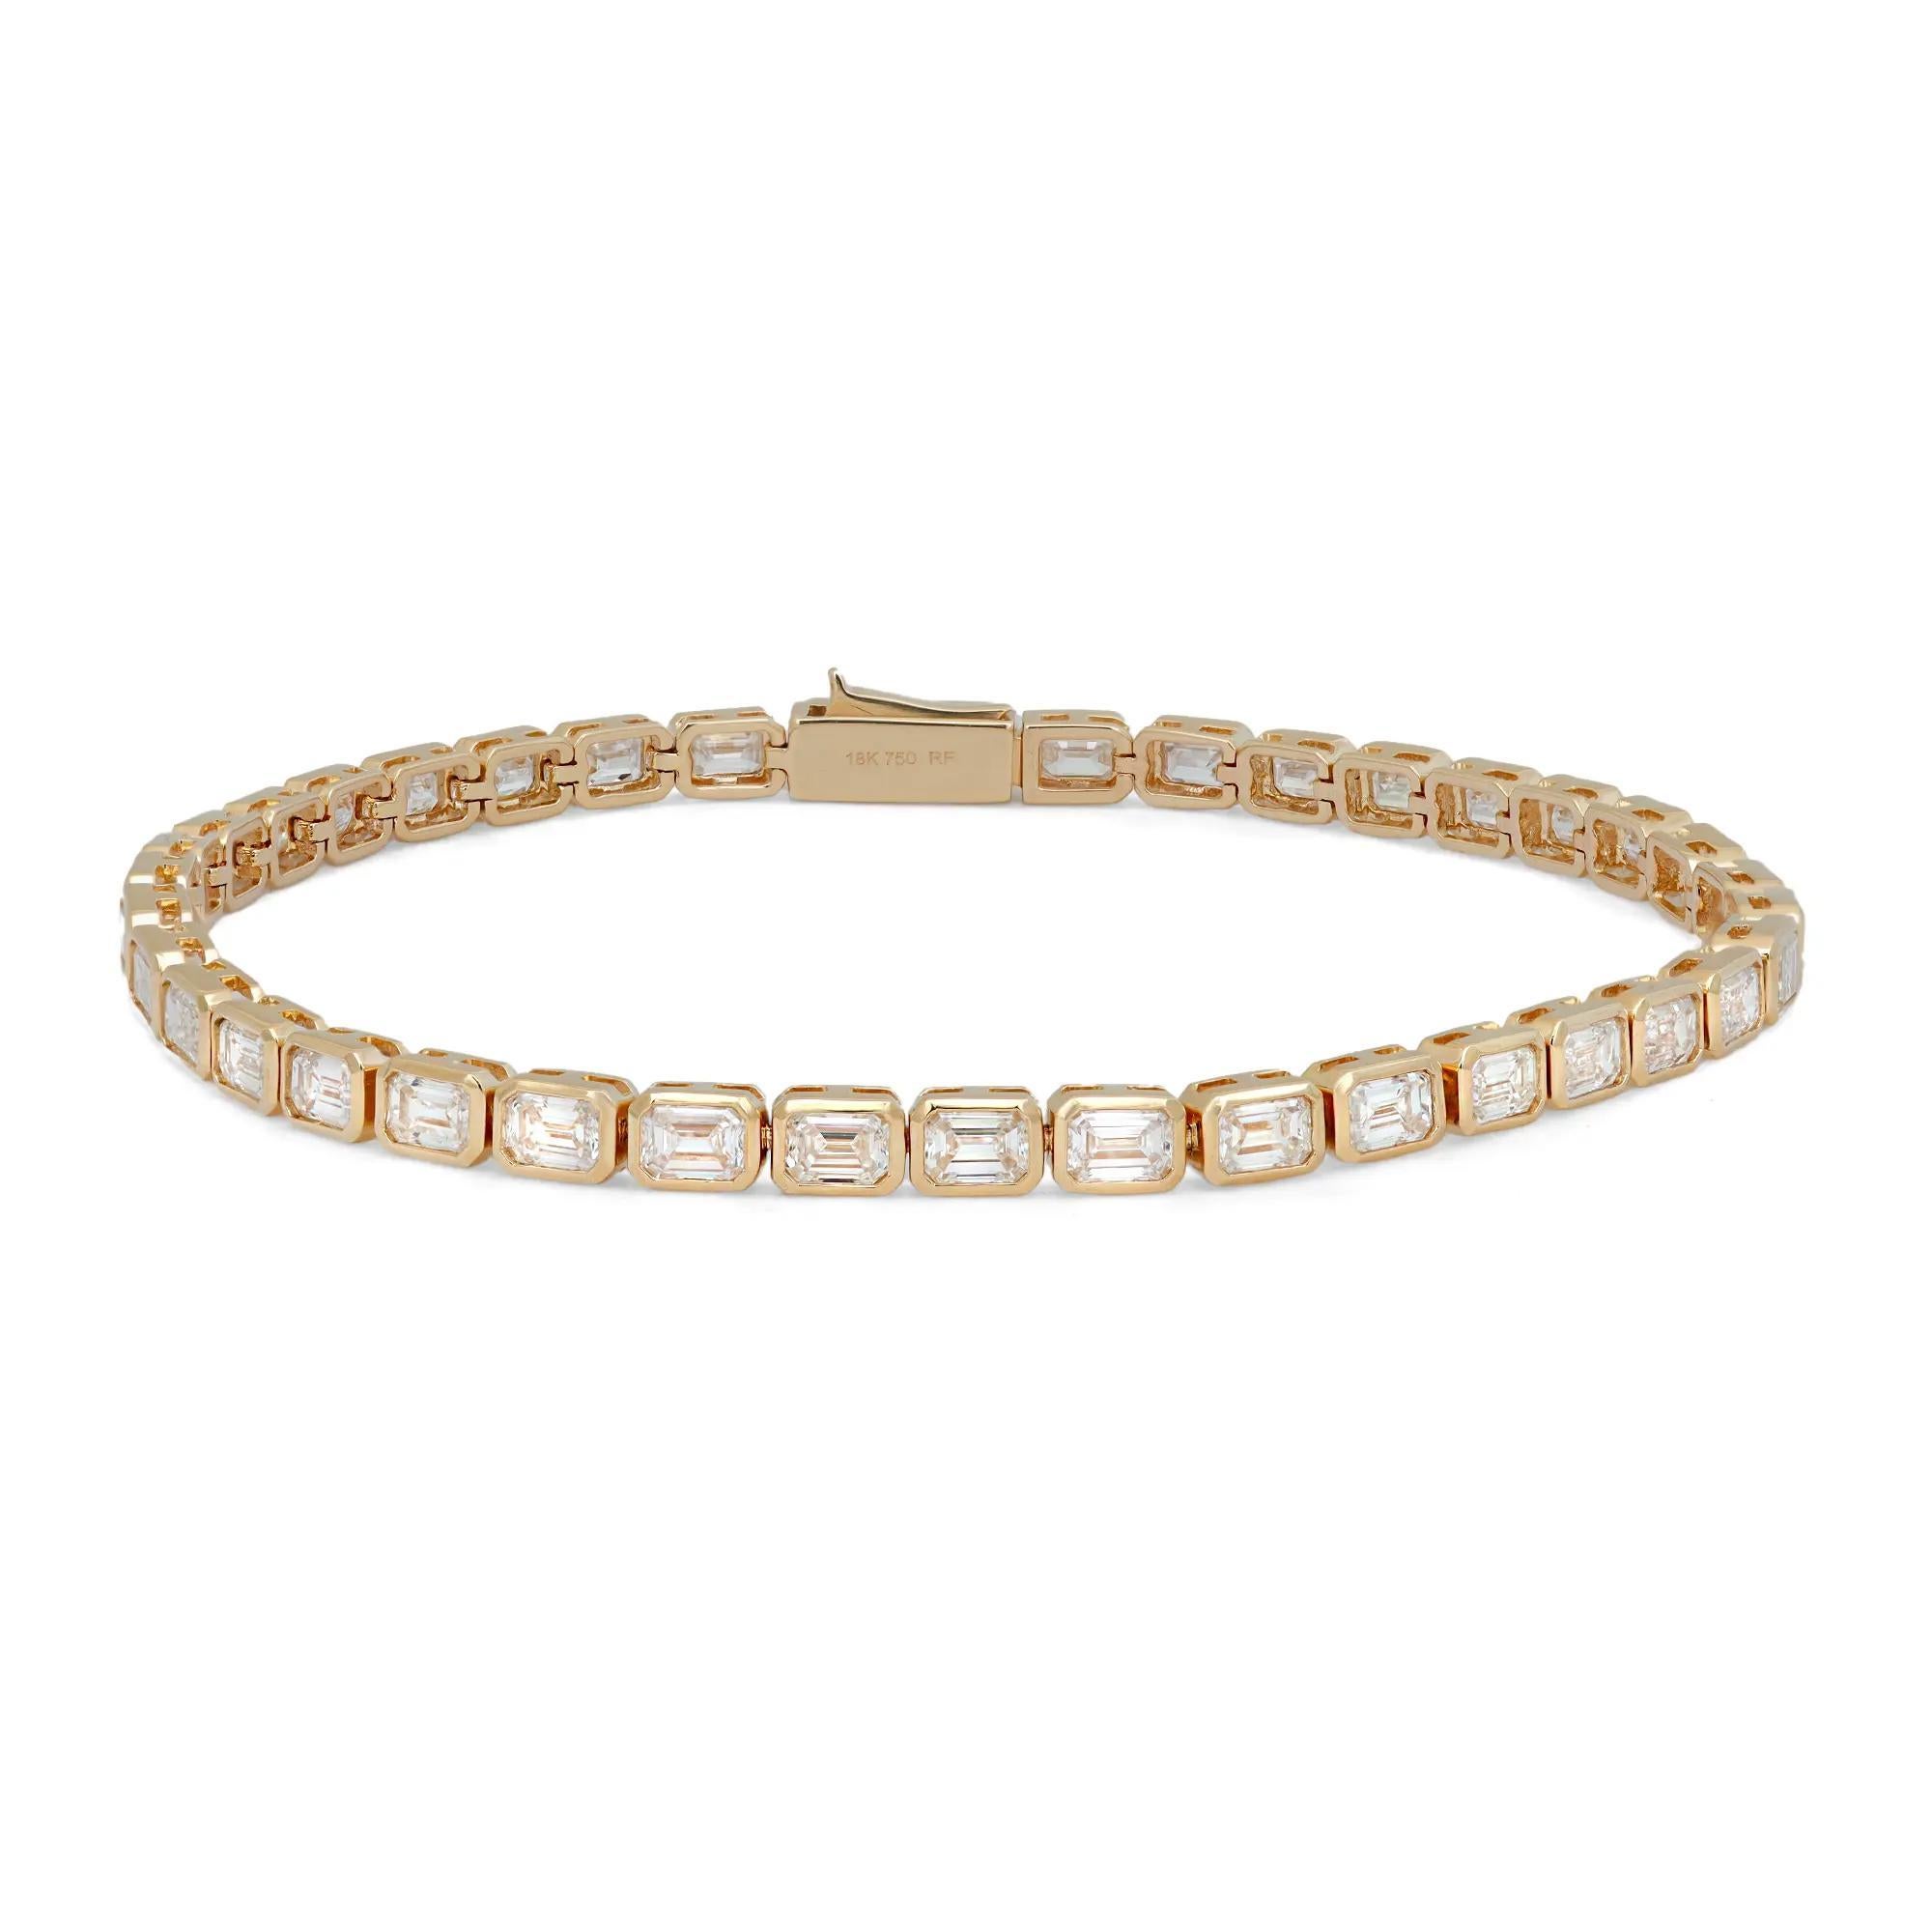 5.16 Carat Emerald Cut Diamond East-West Bezel Tennis Bracelet 18K Yellow Gold In New Condition For Sale In New York, NY